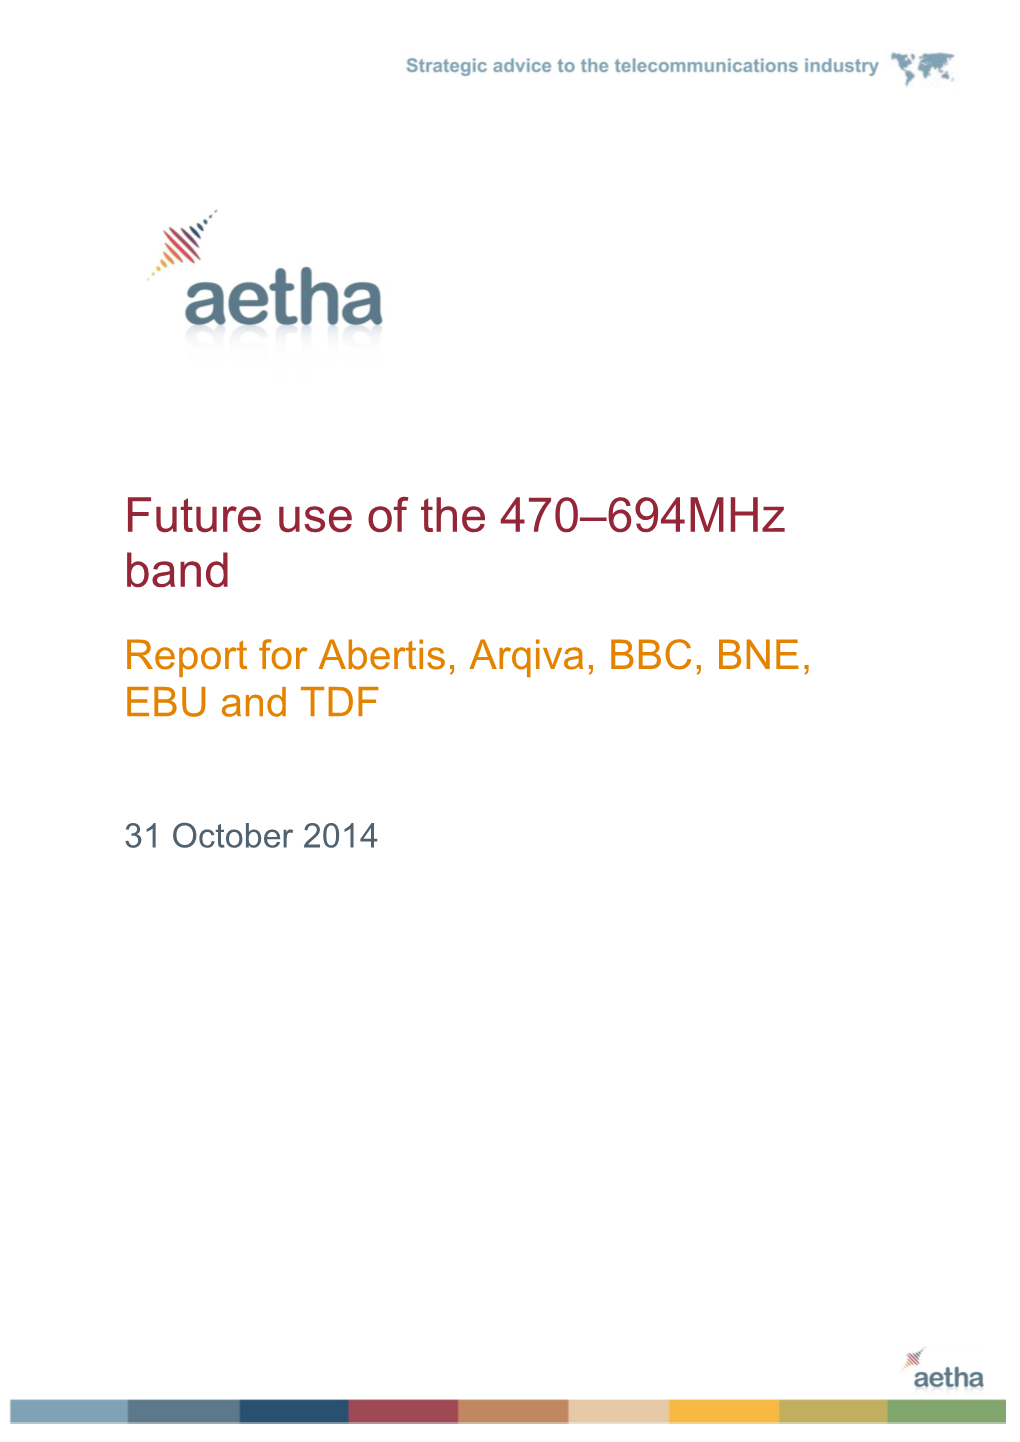 Aetha's Report on the Future Use of the 470 -694Mhz Band